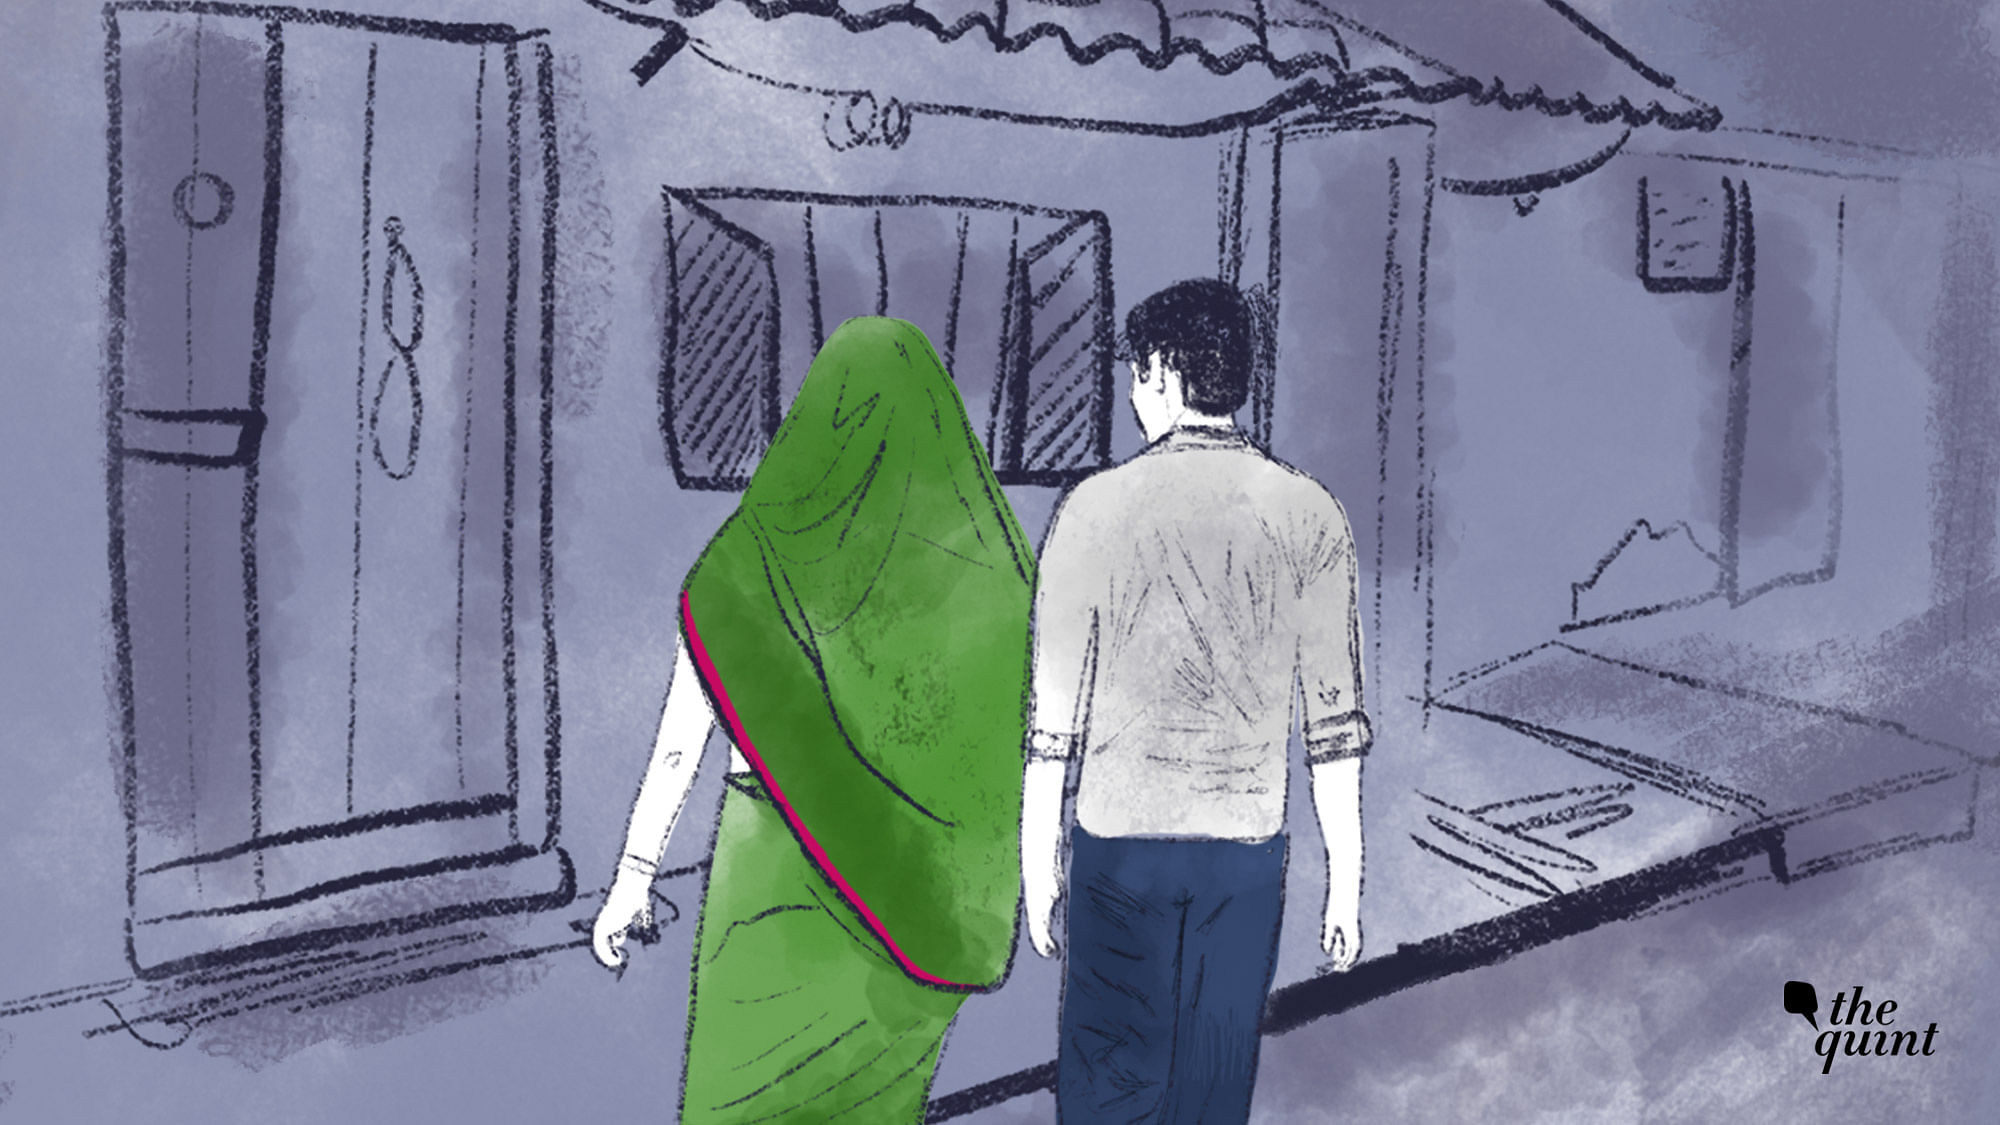 Radha* was reminded of her ‘lowly origins’ at each stage when she tried to report her rape.